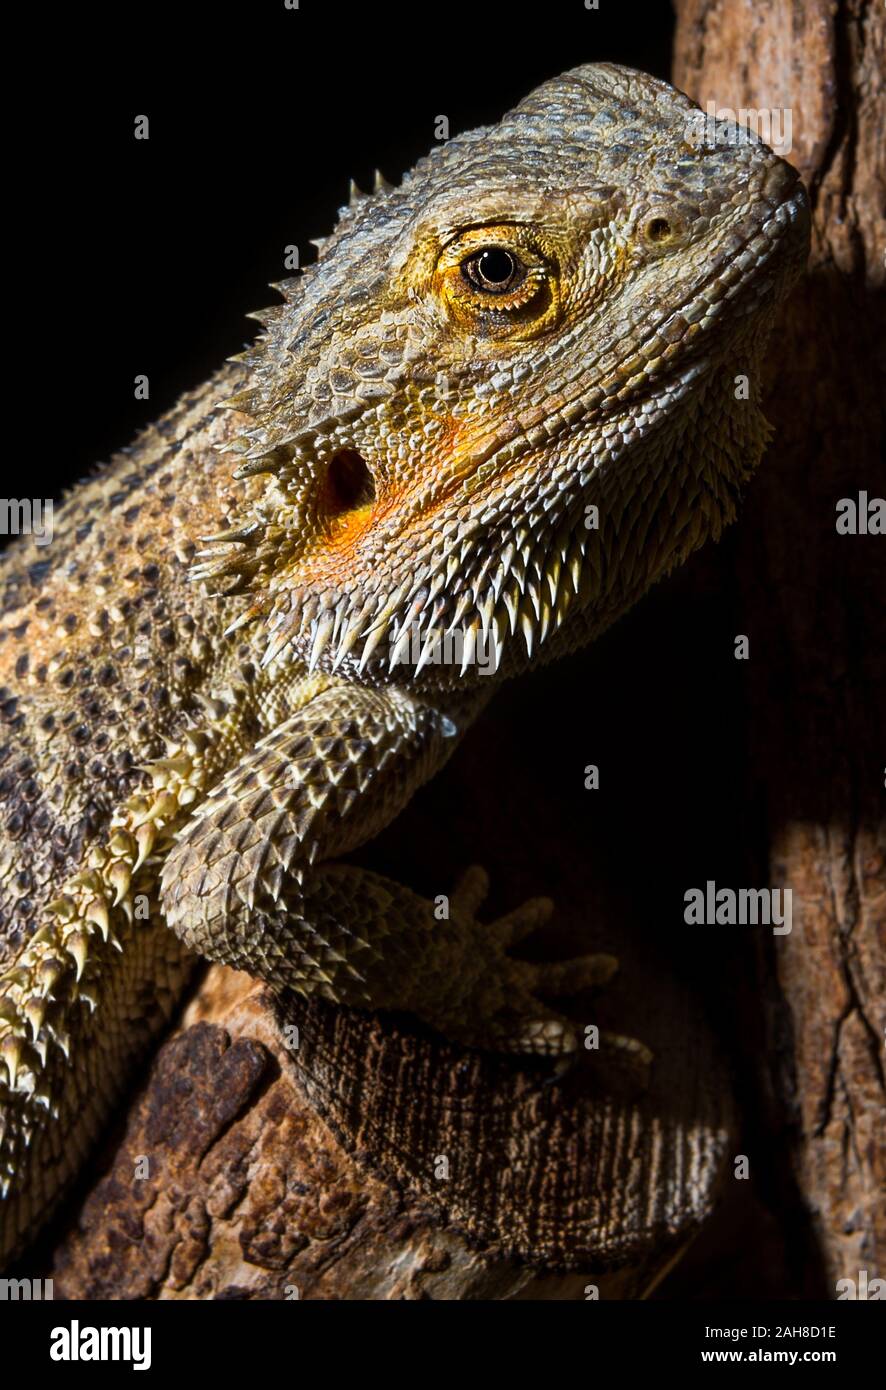 Close up of an orange and green spiky lizard climbing on a branch against a black background Stock Photo